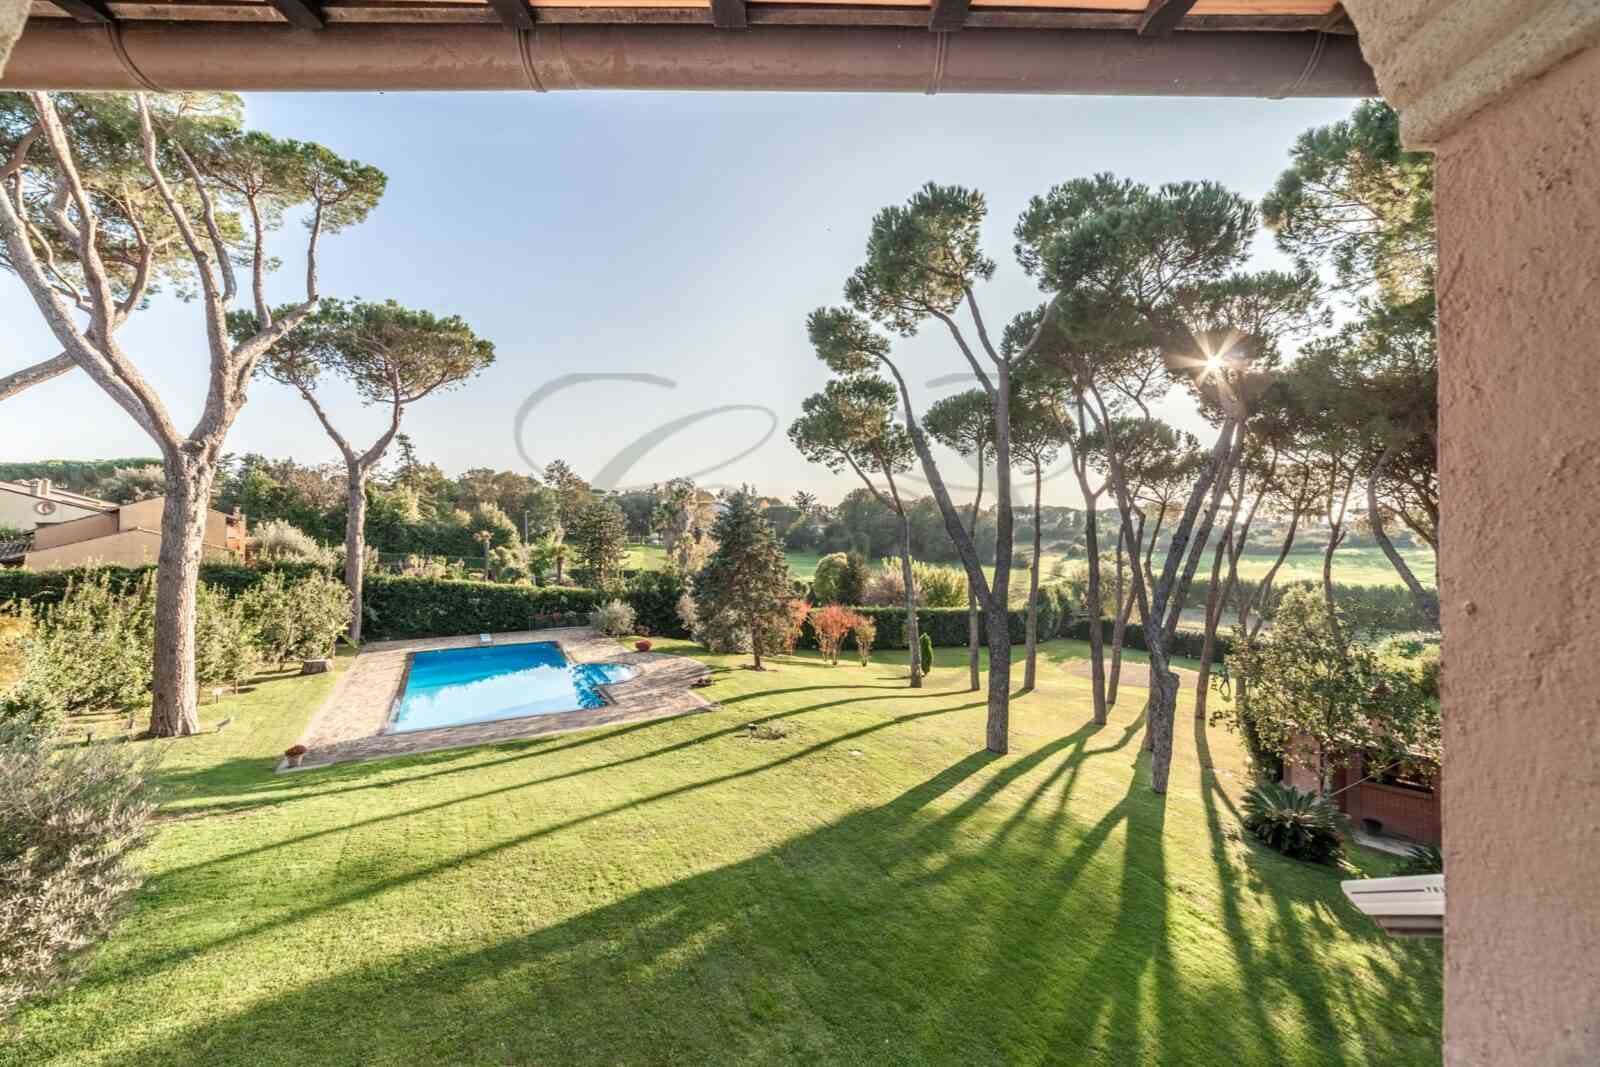 Italian Luxury Villas for Sale: Magnificent Residence in Rome